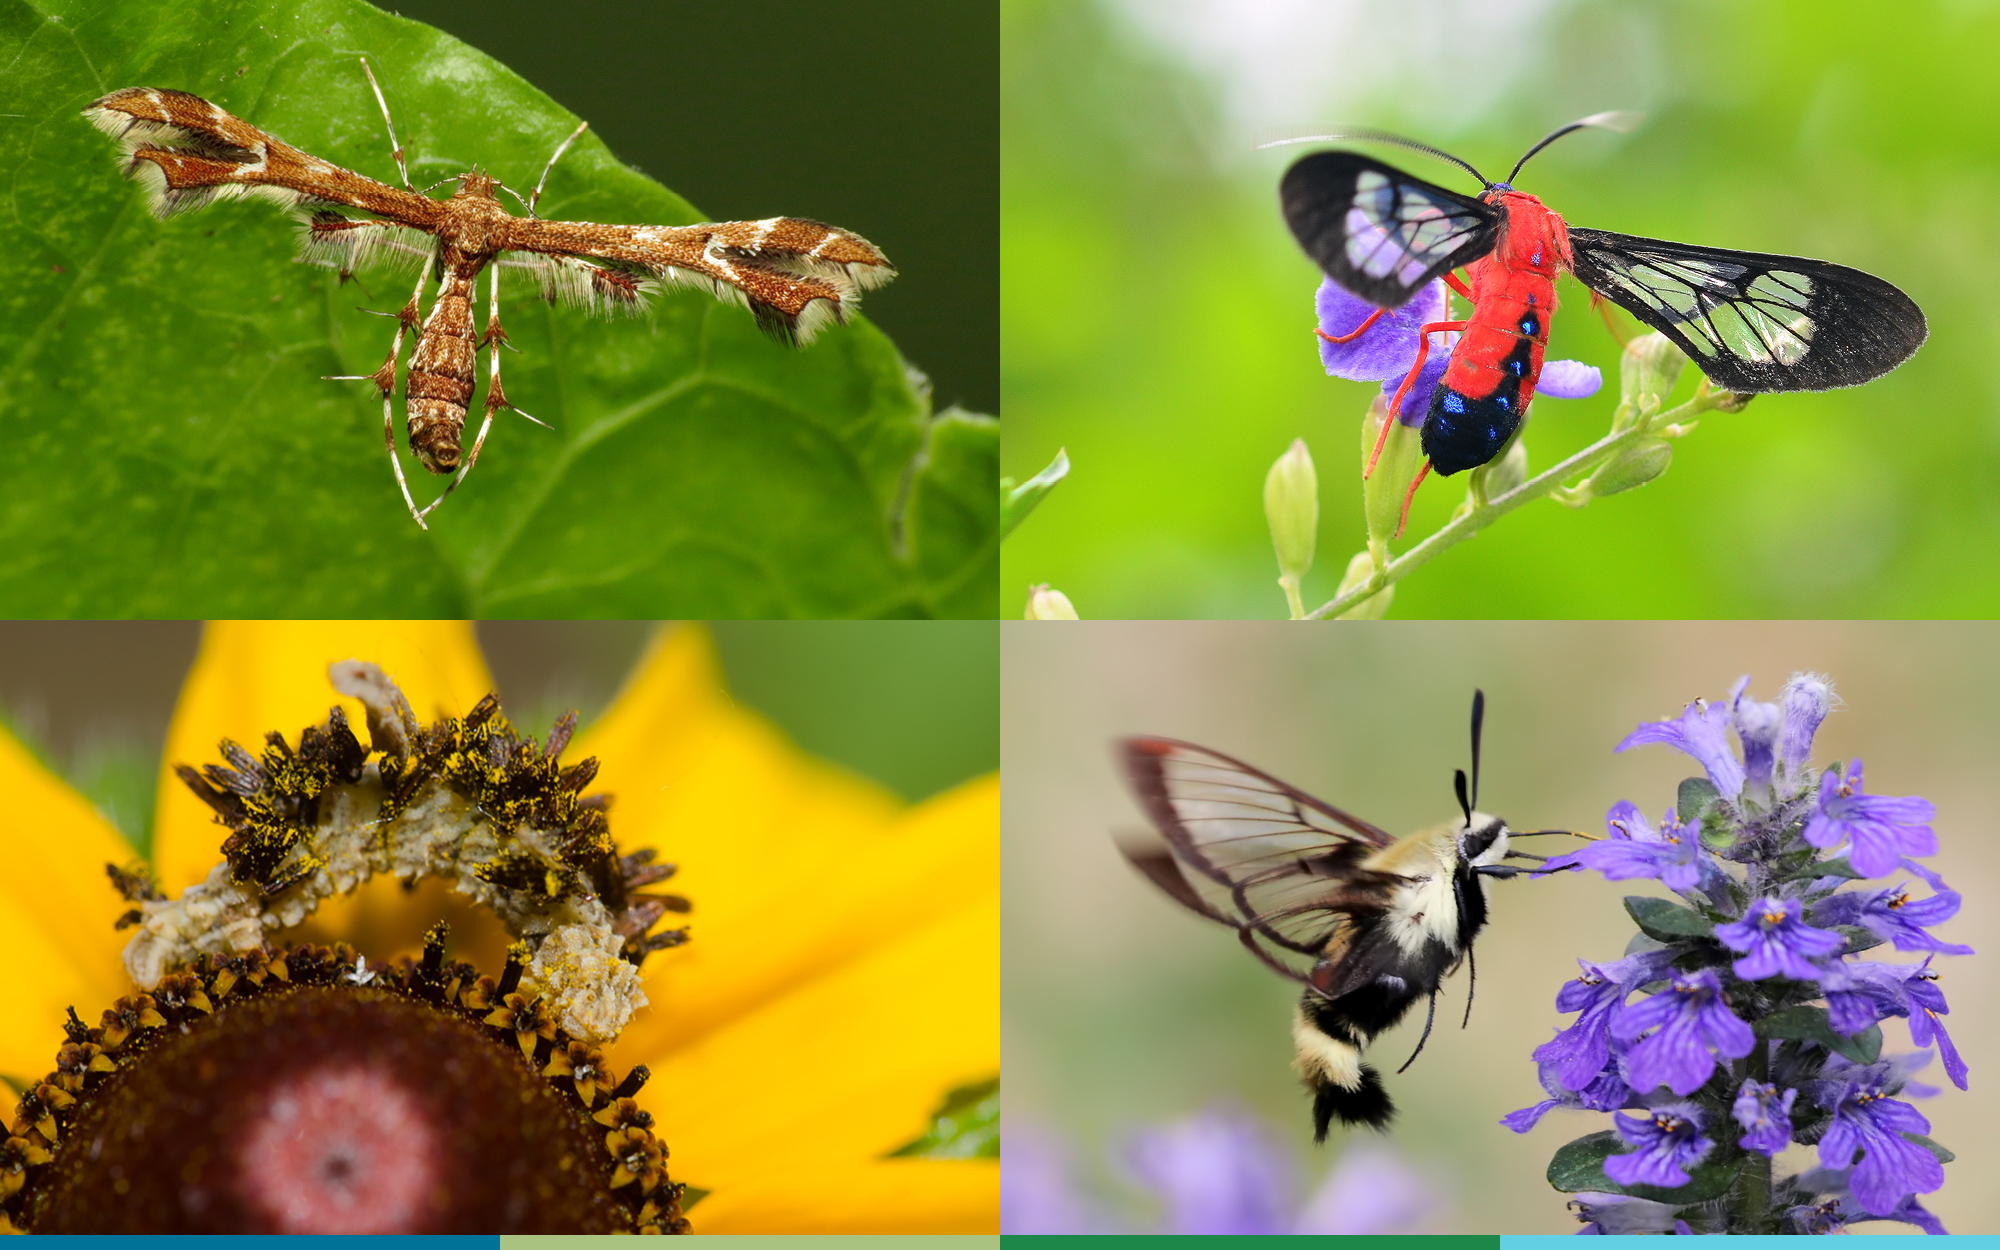 A composite image of four photographs. The moth on top left has narrow wings held in a T-shape and patterned in brown and white. On the top right, the moth has a bright red and black body and wings that are transparent with black markings. On the lower right, the moth is pale brown and black and is hovering in front of a purple flower. On the lower left is a caterpillar that has stuck pieces of the flower to itself to hide as it eats.